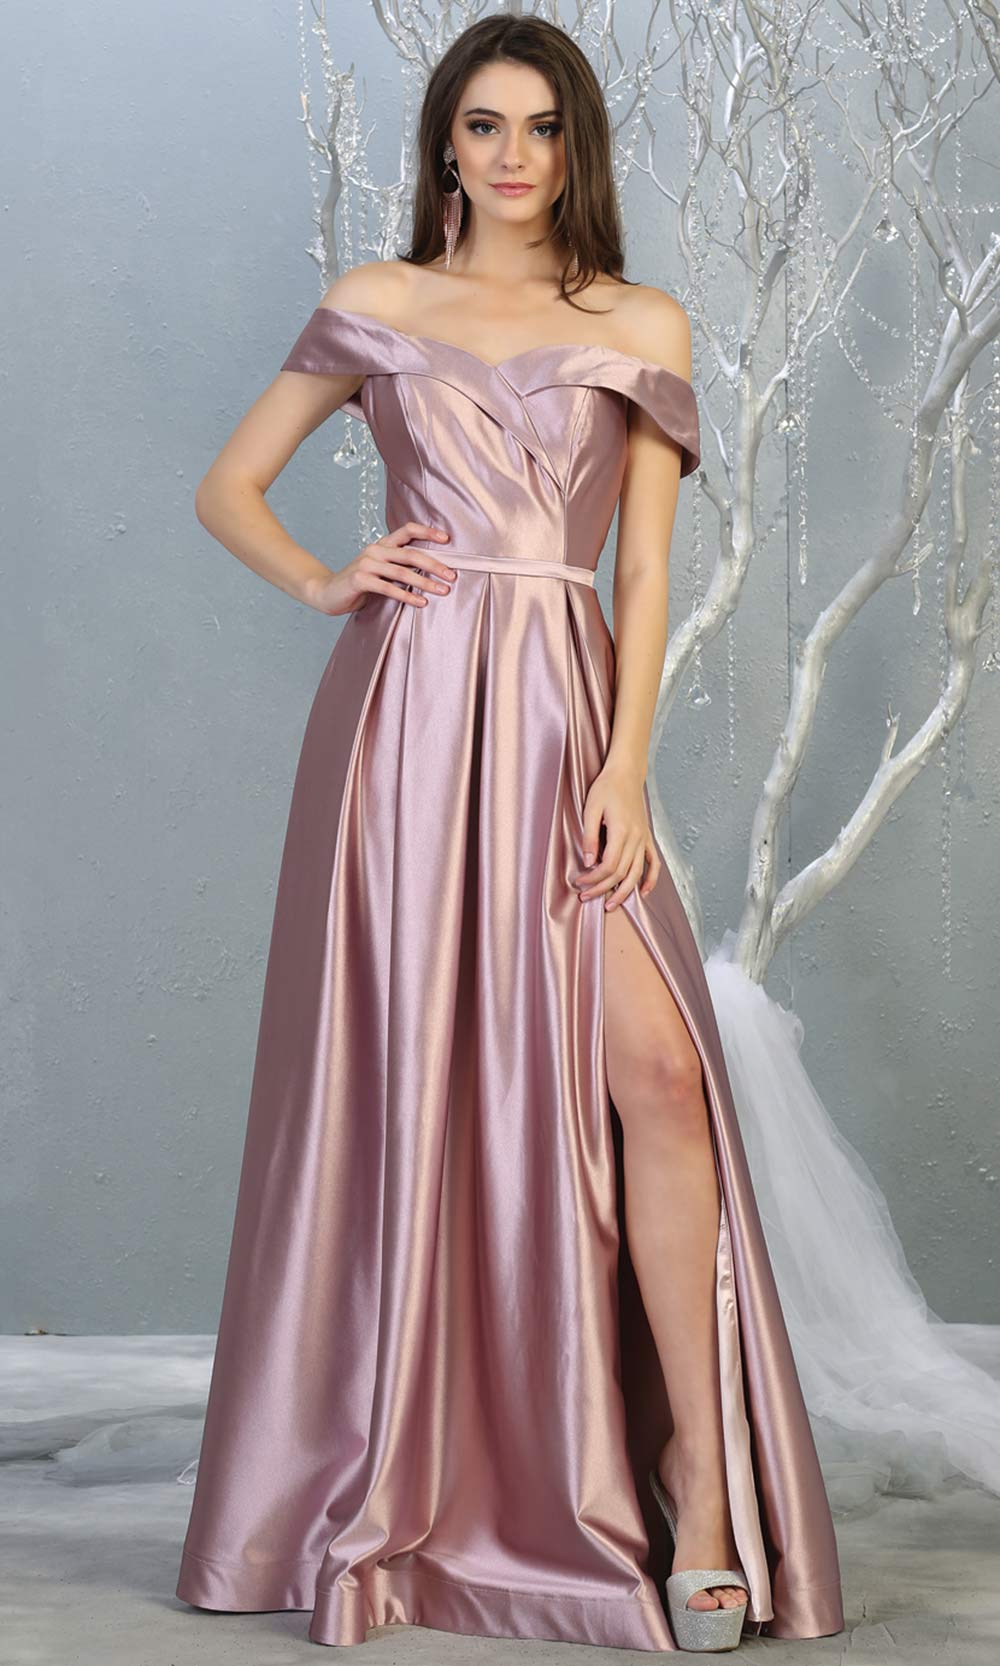 Mayqueen MQ 1781 long mauve off shoulder evening flowy dress w/ high slit. Full length dusty rose satin gown is perfect for  enagagement/e-shoot dress, formal wedding guest, indowestern gown, evening party dress, prom, bridesmaid. Plus sizes avail.jpg